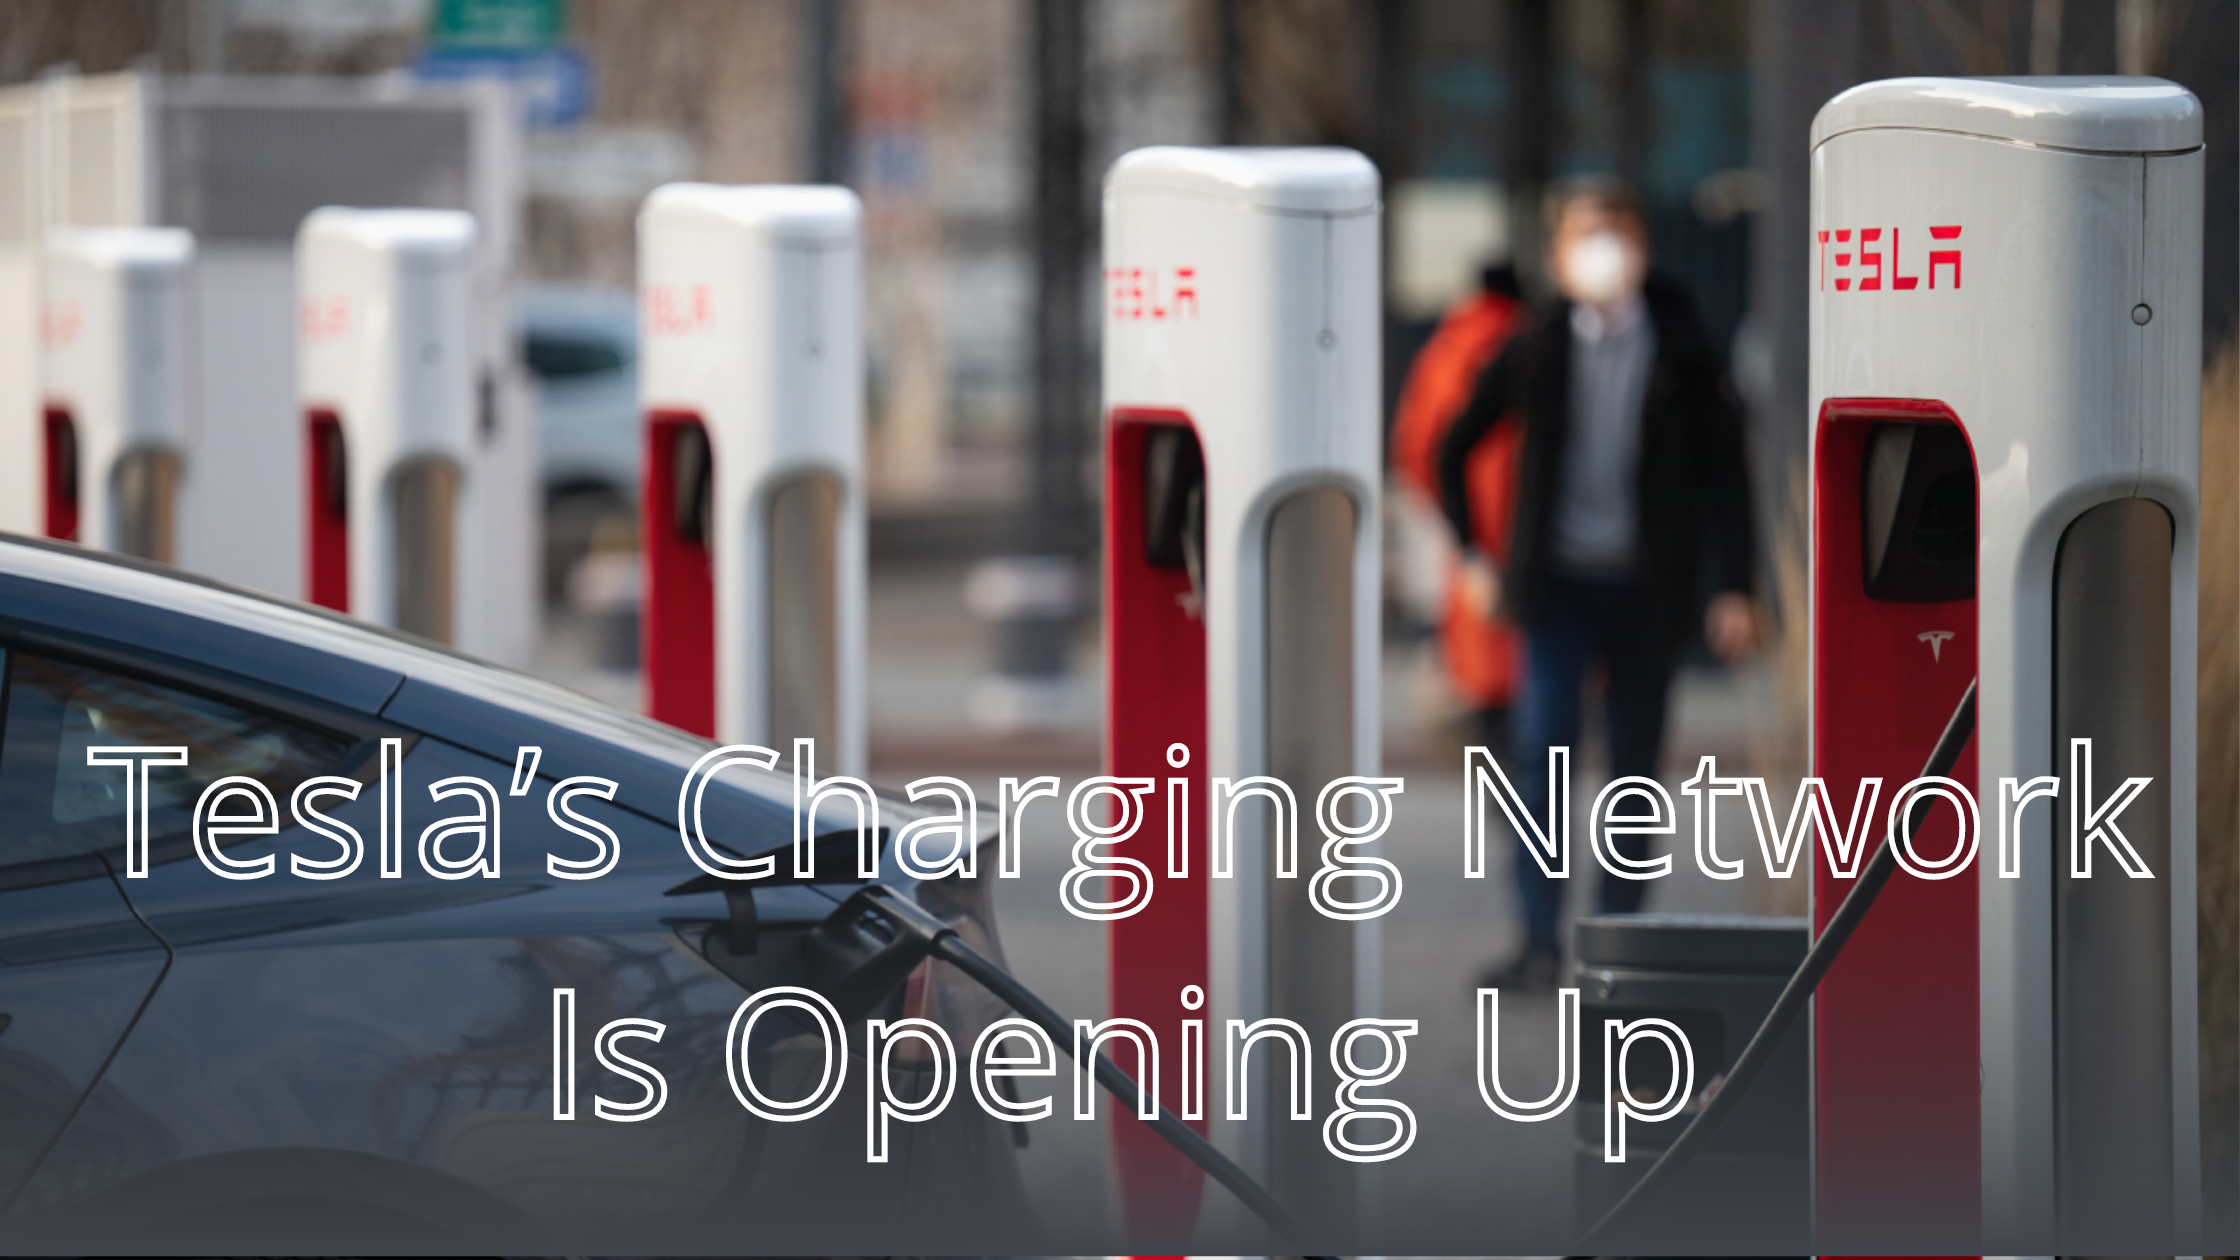 Tesla’s Charging Network Is Opening Up